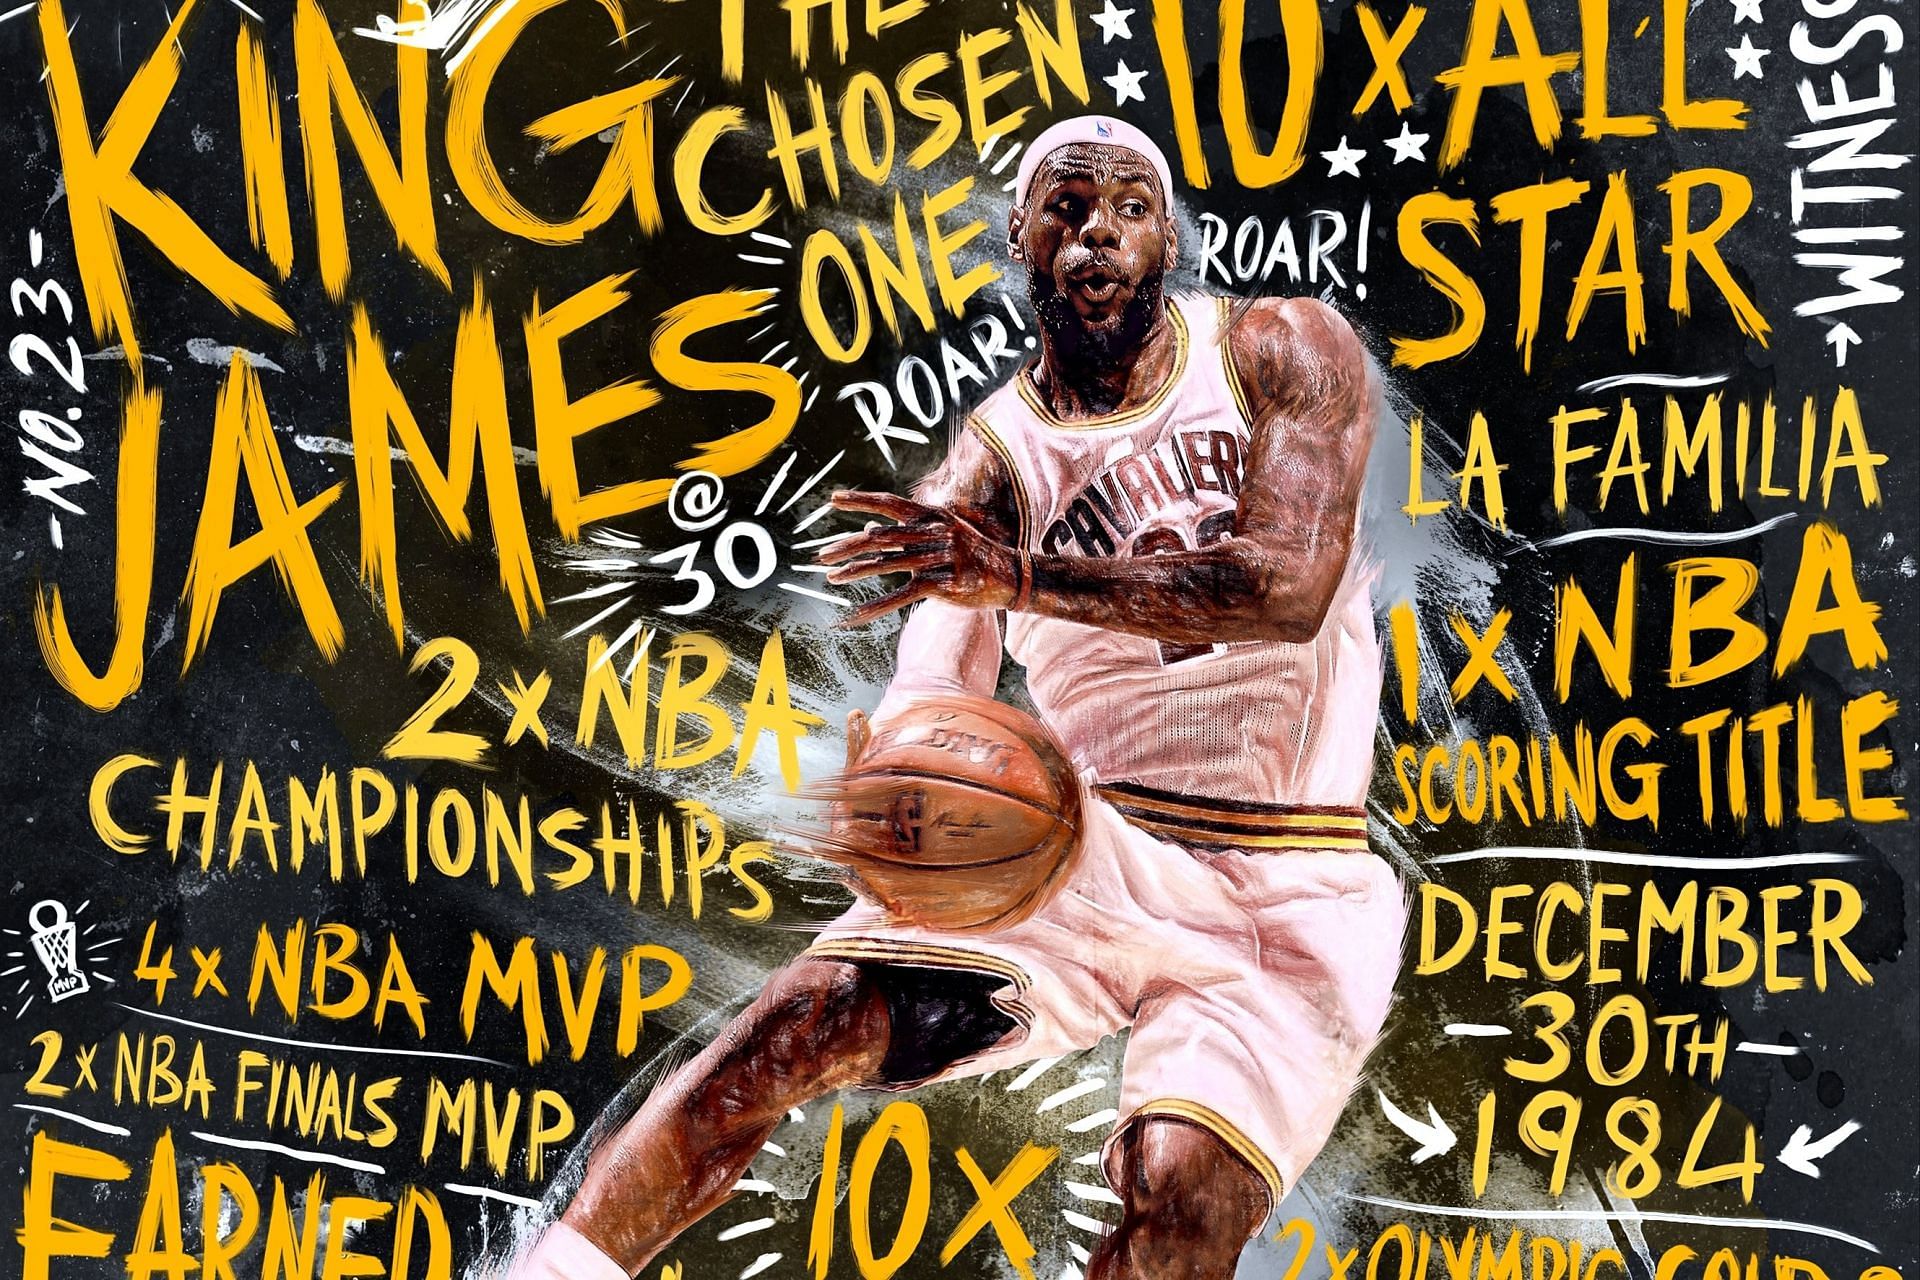 LeBron James is relentlessly going up in many of the most important statistical categories in NBA history. [Photo: Bleacher Report]